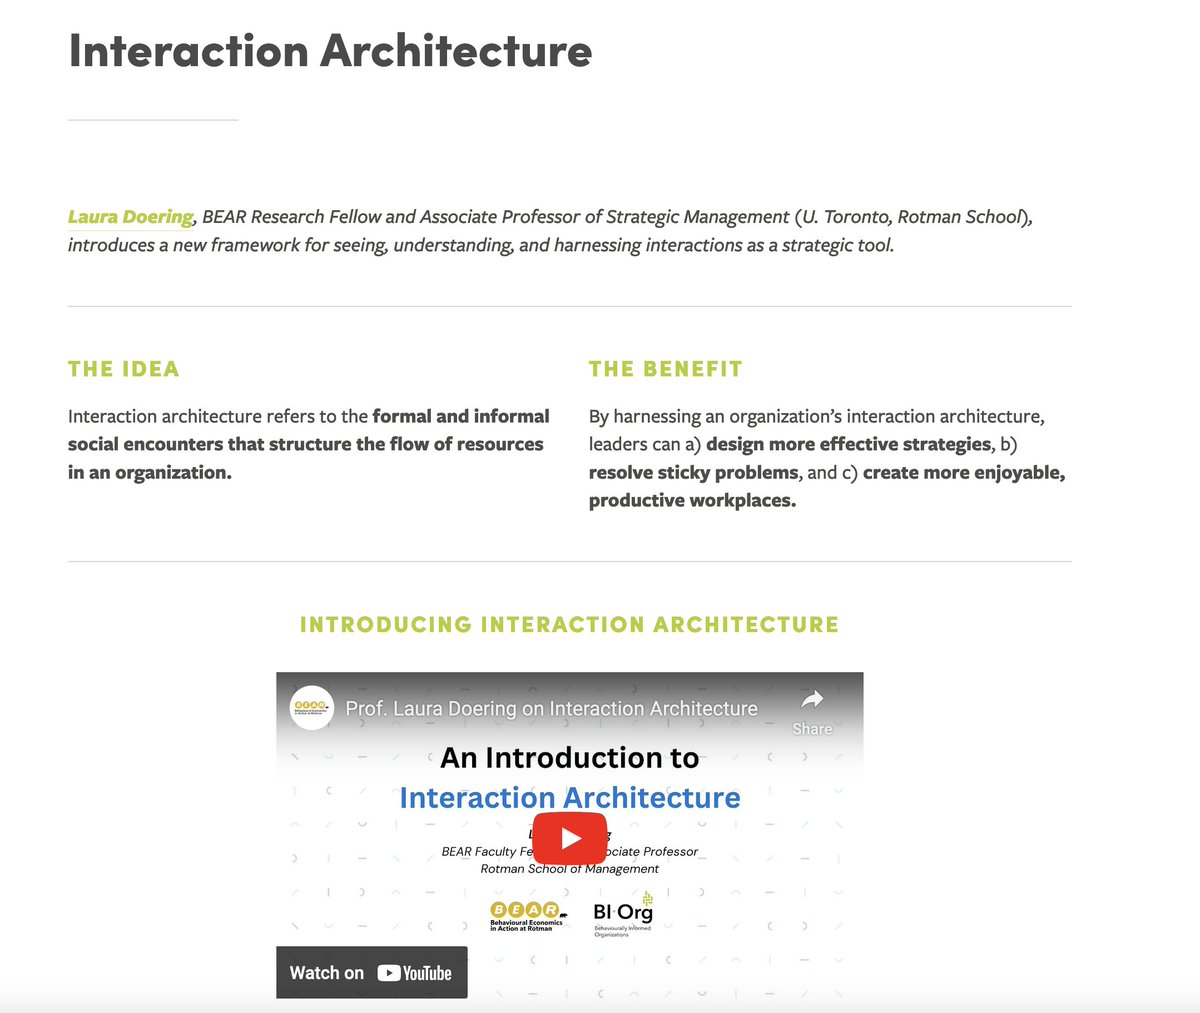 I’m thrilled to collaborate with @UofT_BEAR to share how Interaction Architecture can help organizations strategize, solve problems, and create more enjoyable workplaces. @rotmanschool @dilipsoman @GenderEconomy Website: tinyurl.com/mr3a69tx Video: tinyurl.com/ms4rsujx